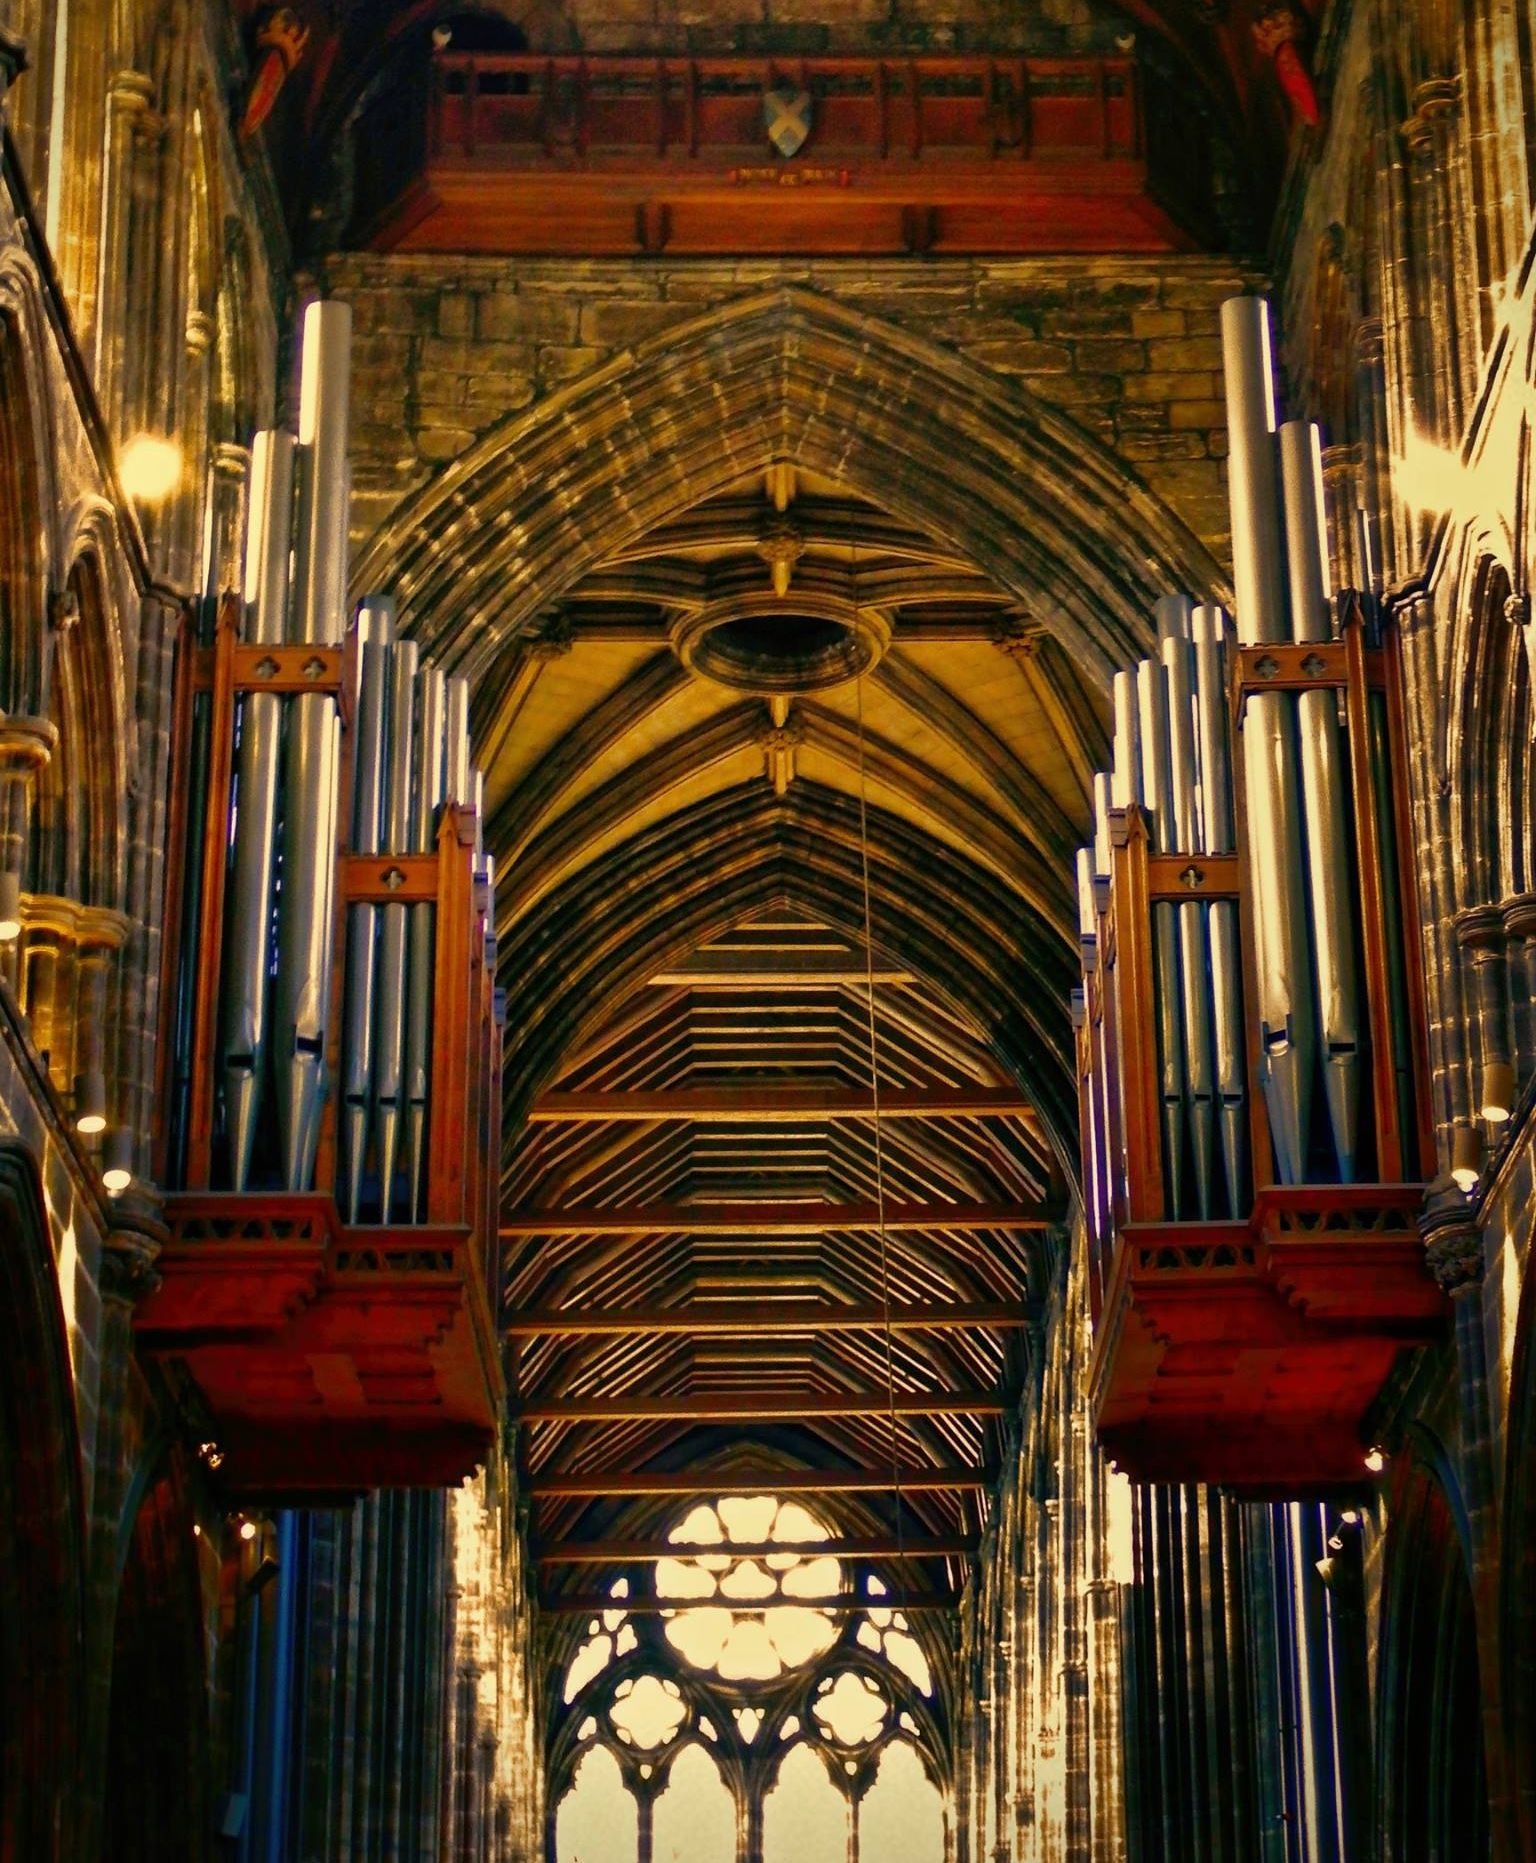 Interior of The Cathedral in Glasgow, Scotland